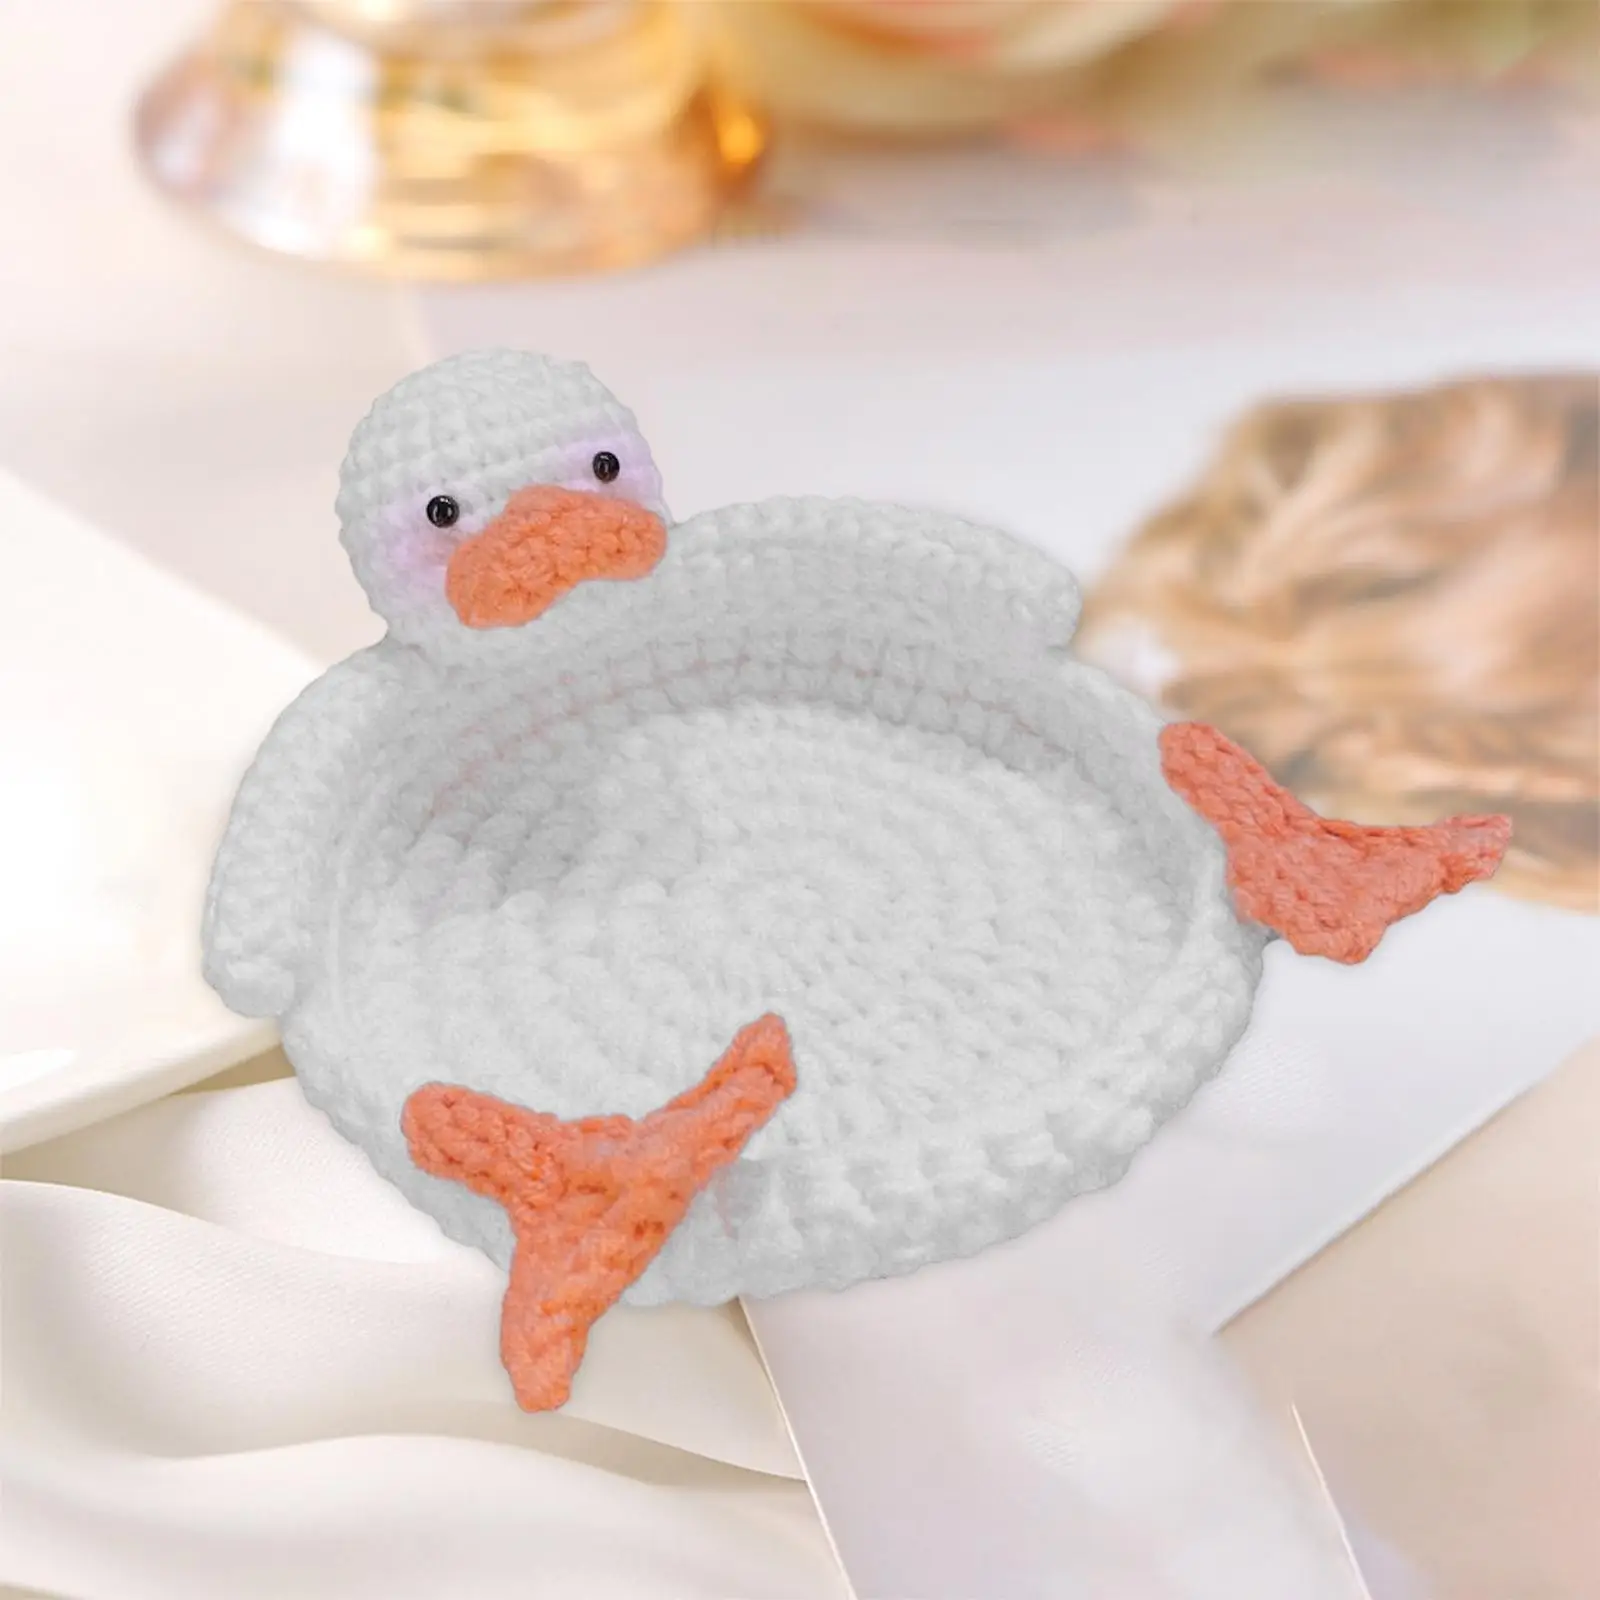 Drinks Coaster Place Mats Duck Shaped Coaster for Dining Table Kitchen Home